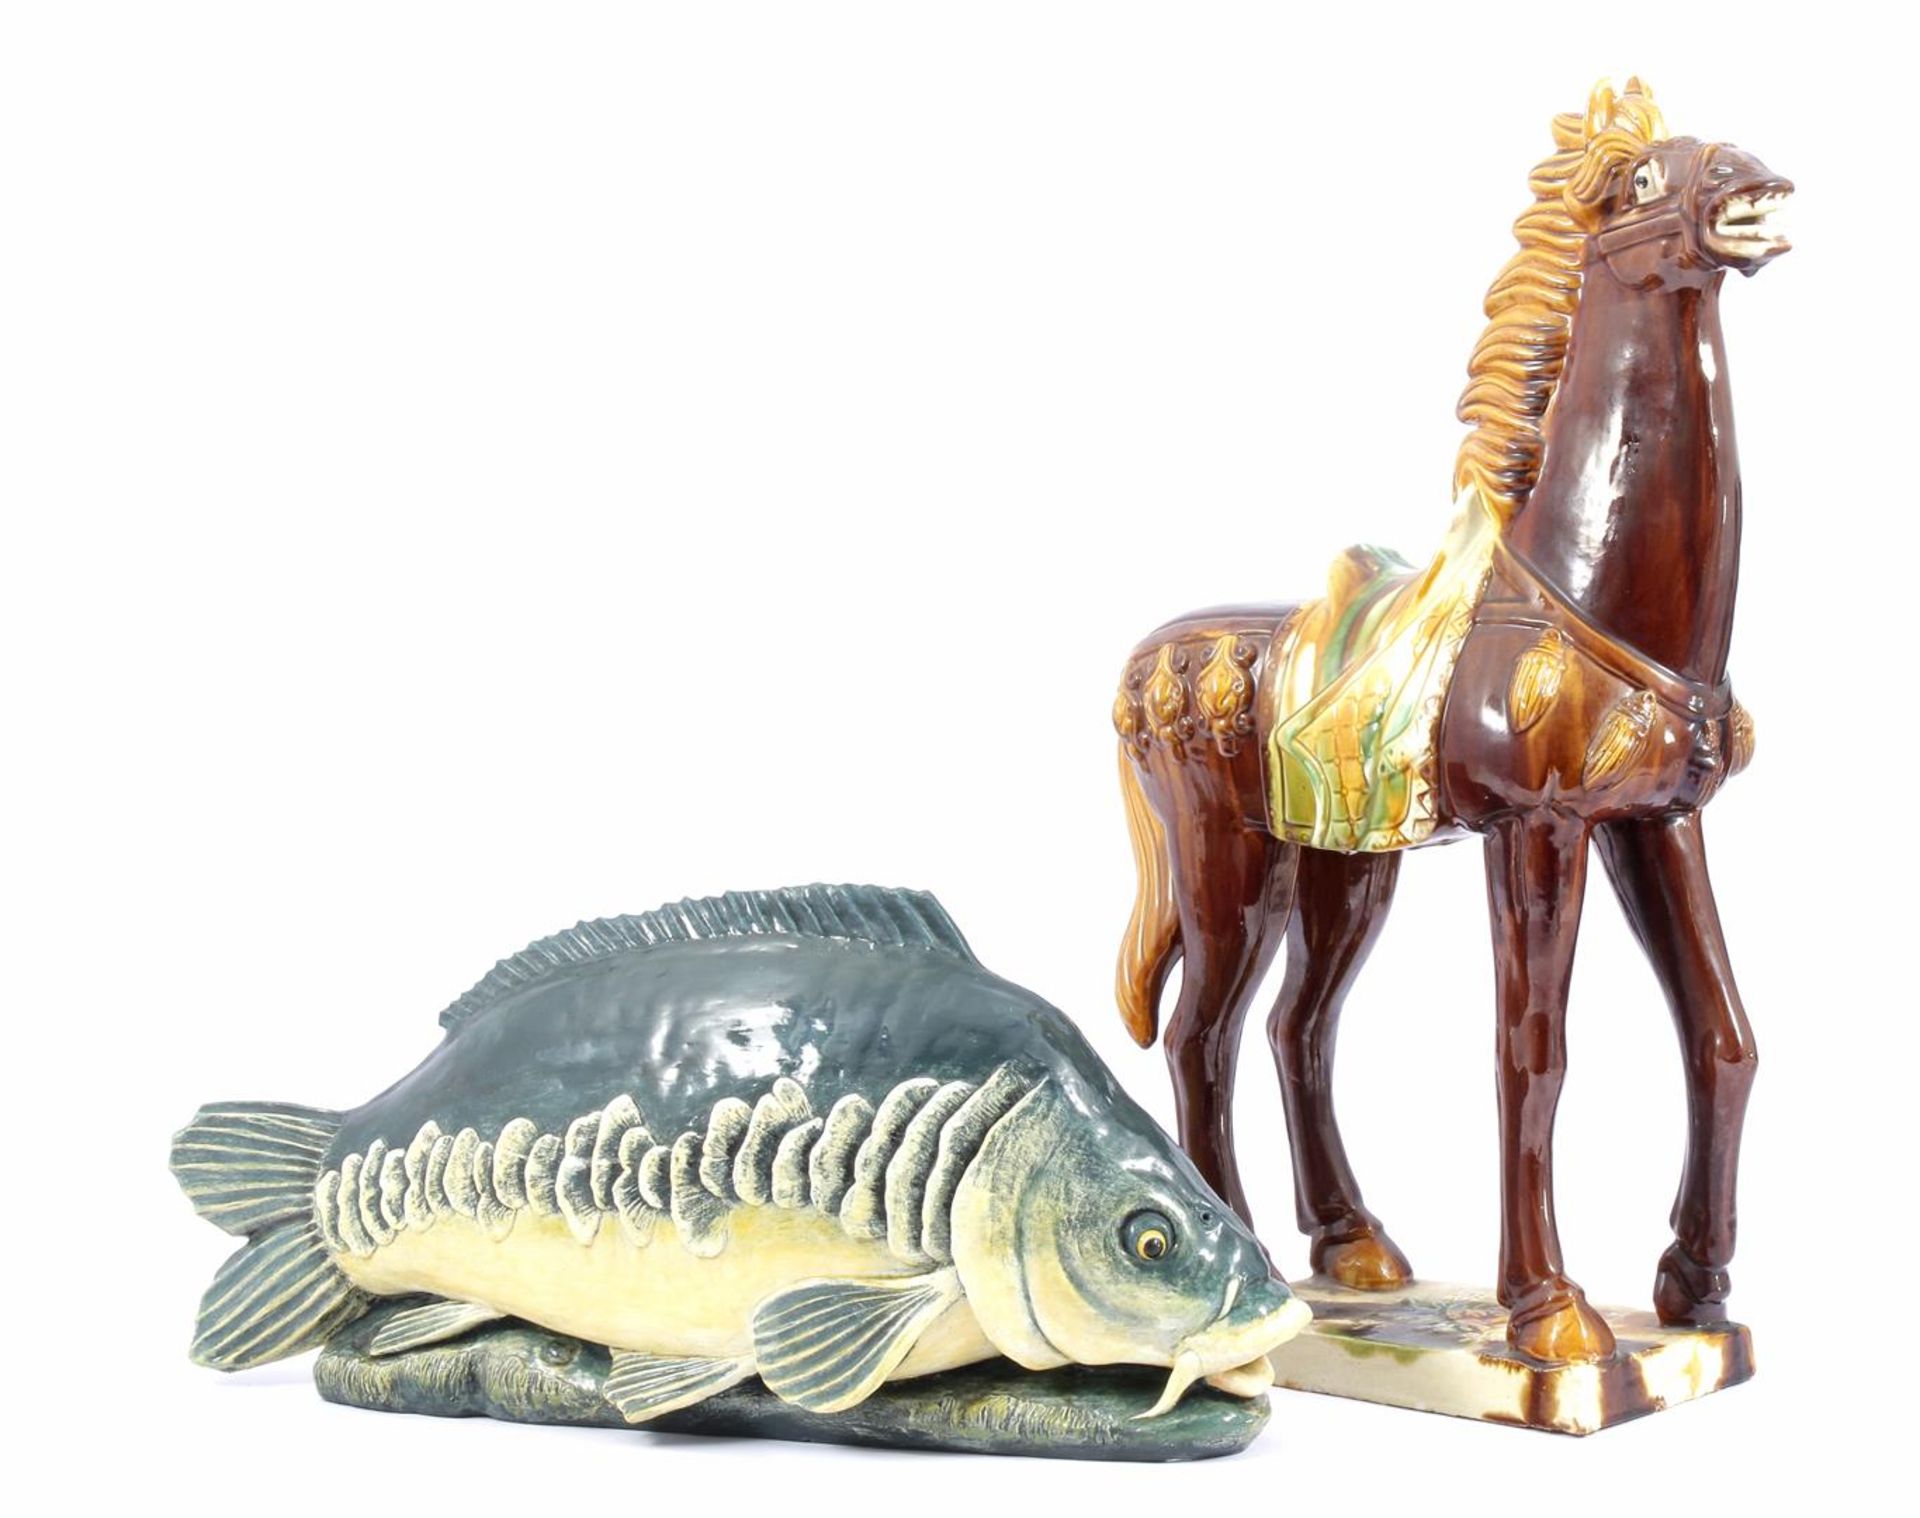 Plaster polychrome glazed statue of a horse 59 cm high, 38 cm long, and the same fish 24 cm high, 55